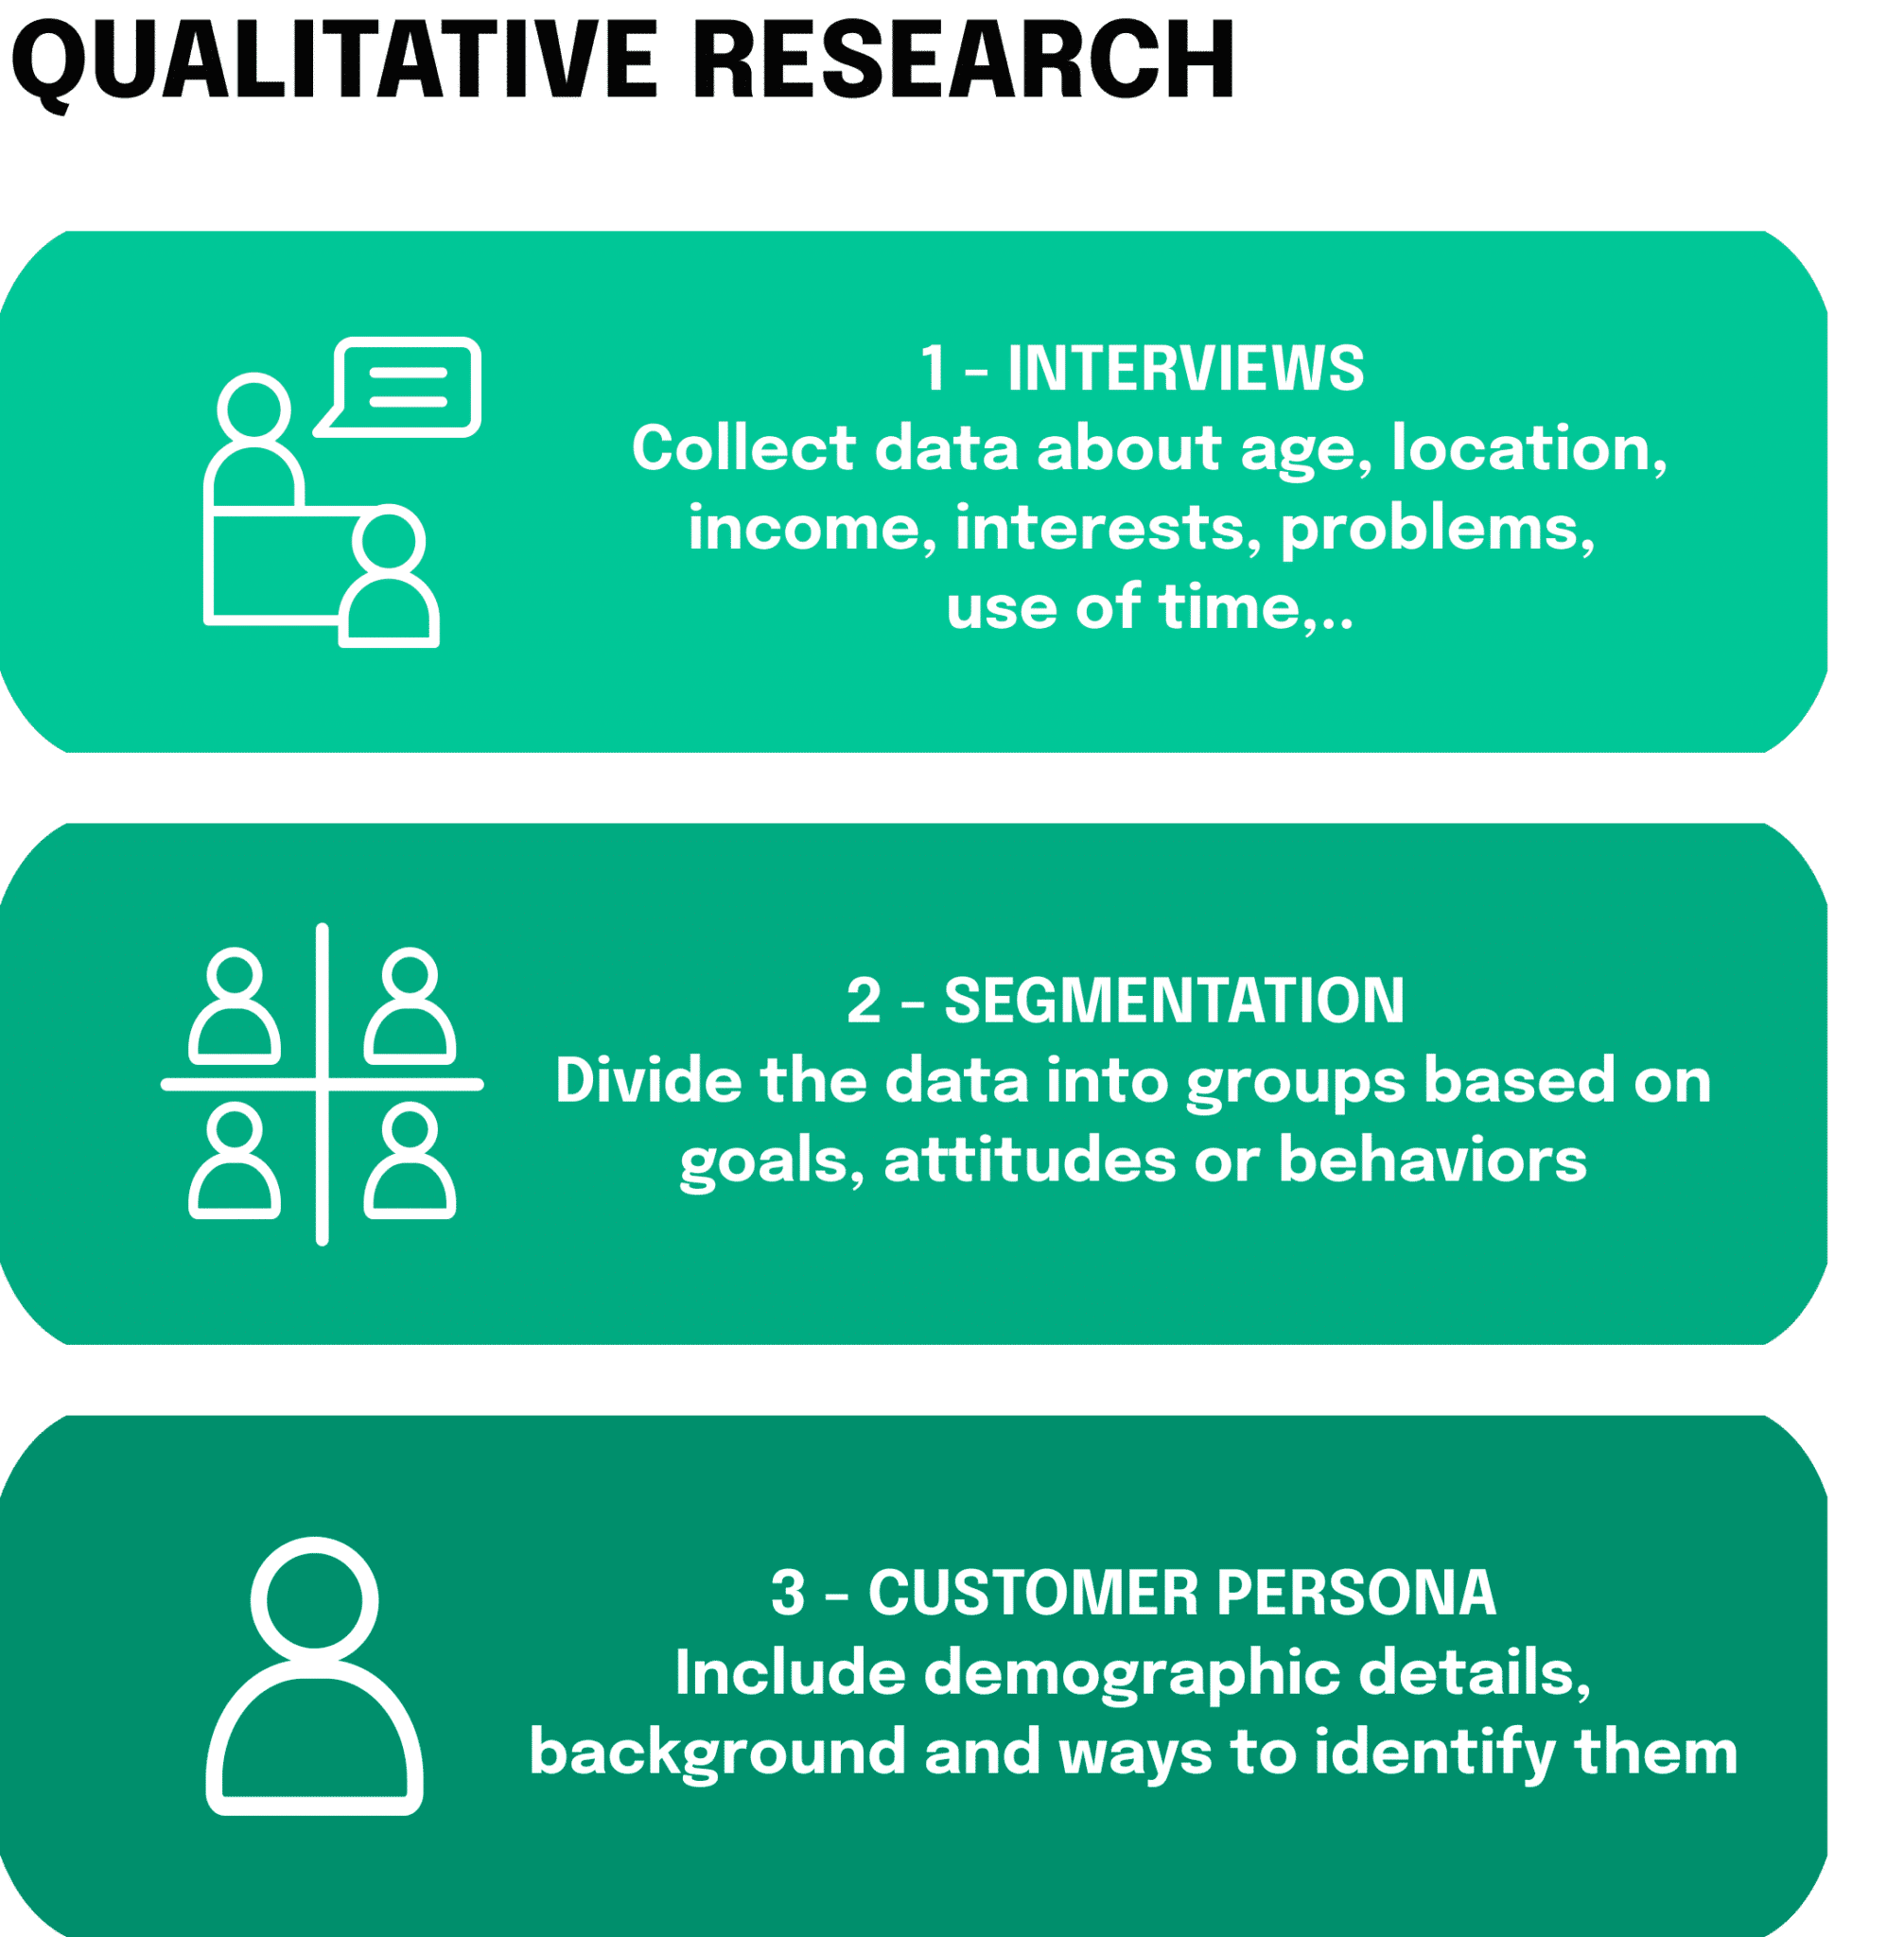 Qualitative research consists of interviews and data collection, the segmentation of the data into groups based on goals, attitudes, or behaviors and the final creation of personas.